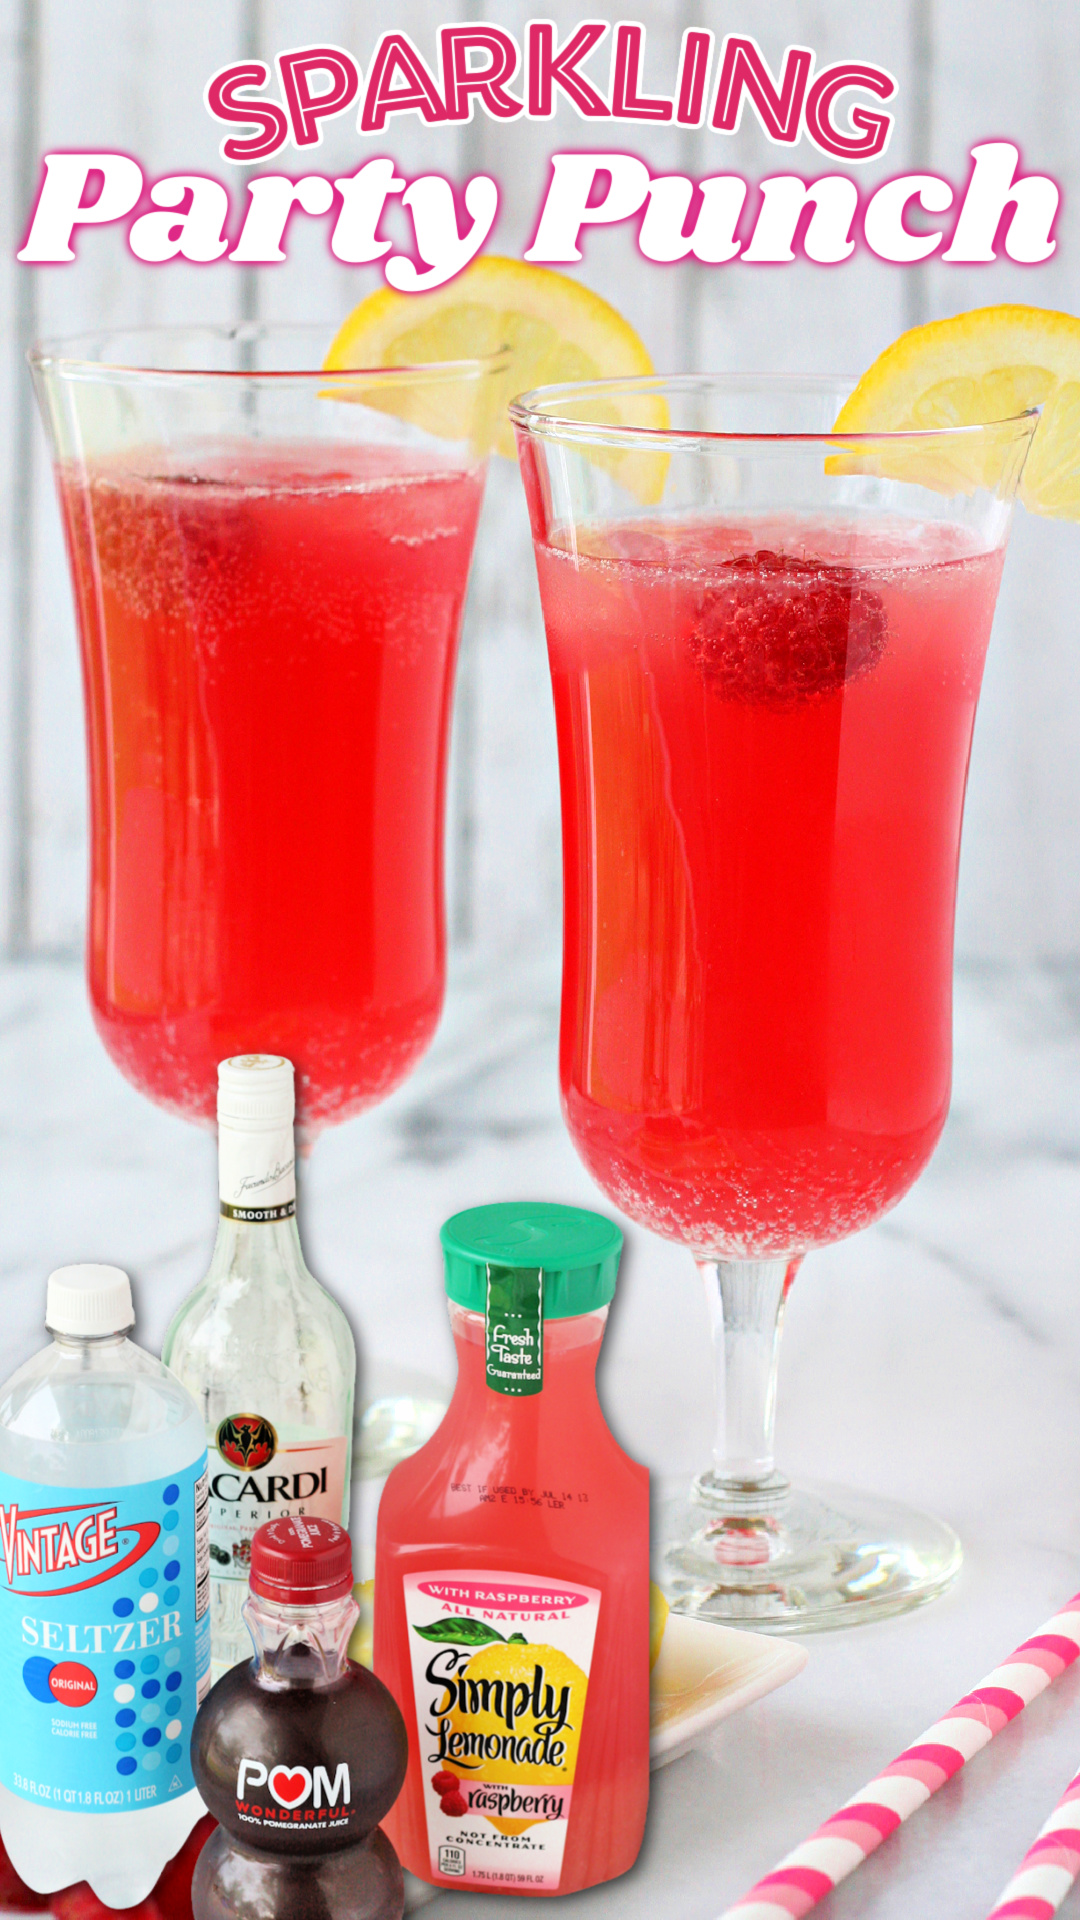 Sparkling Party Punch - Glorious Treats